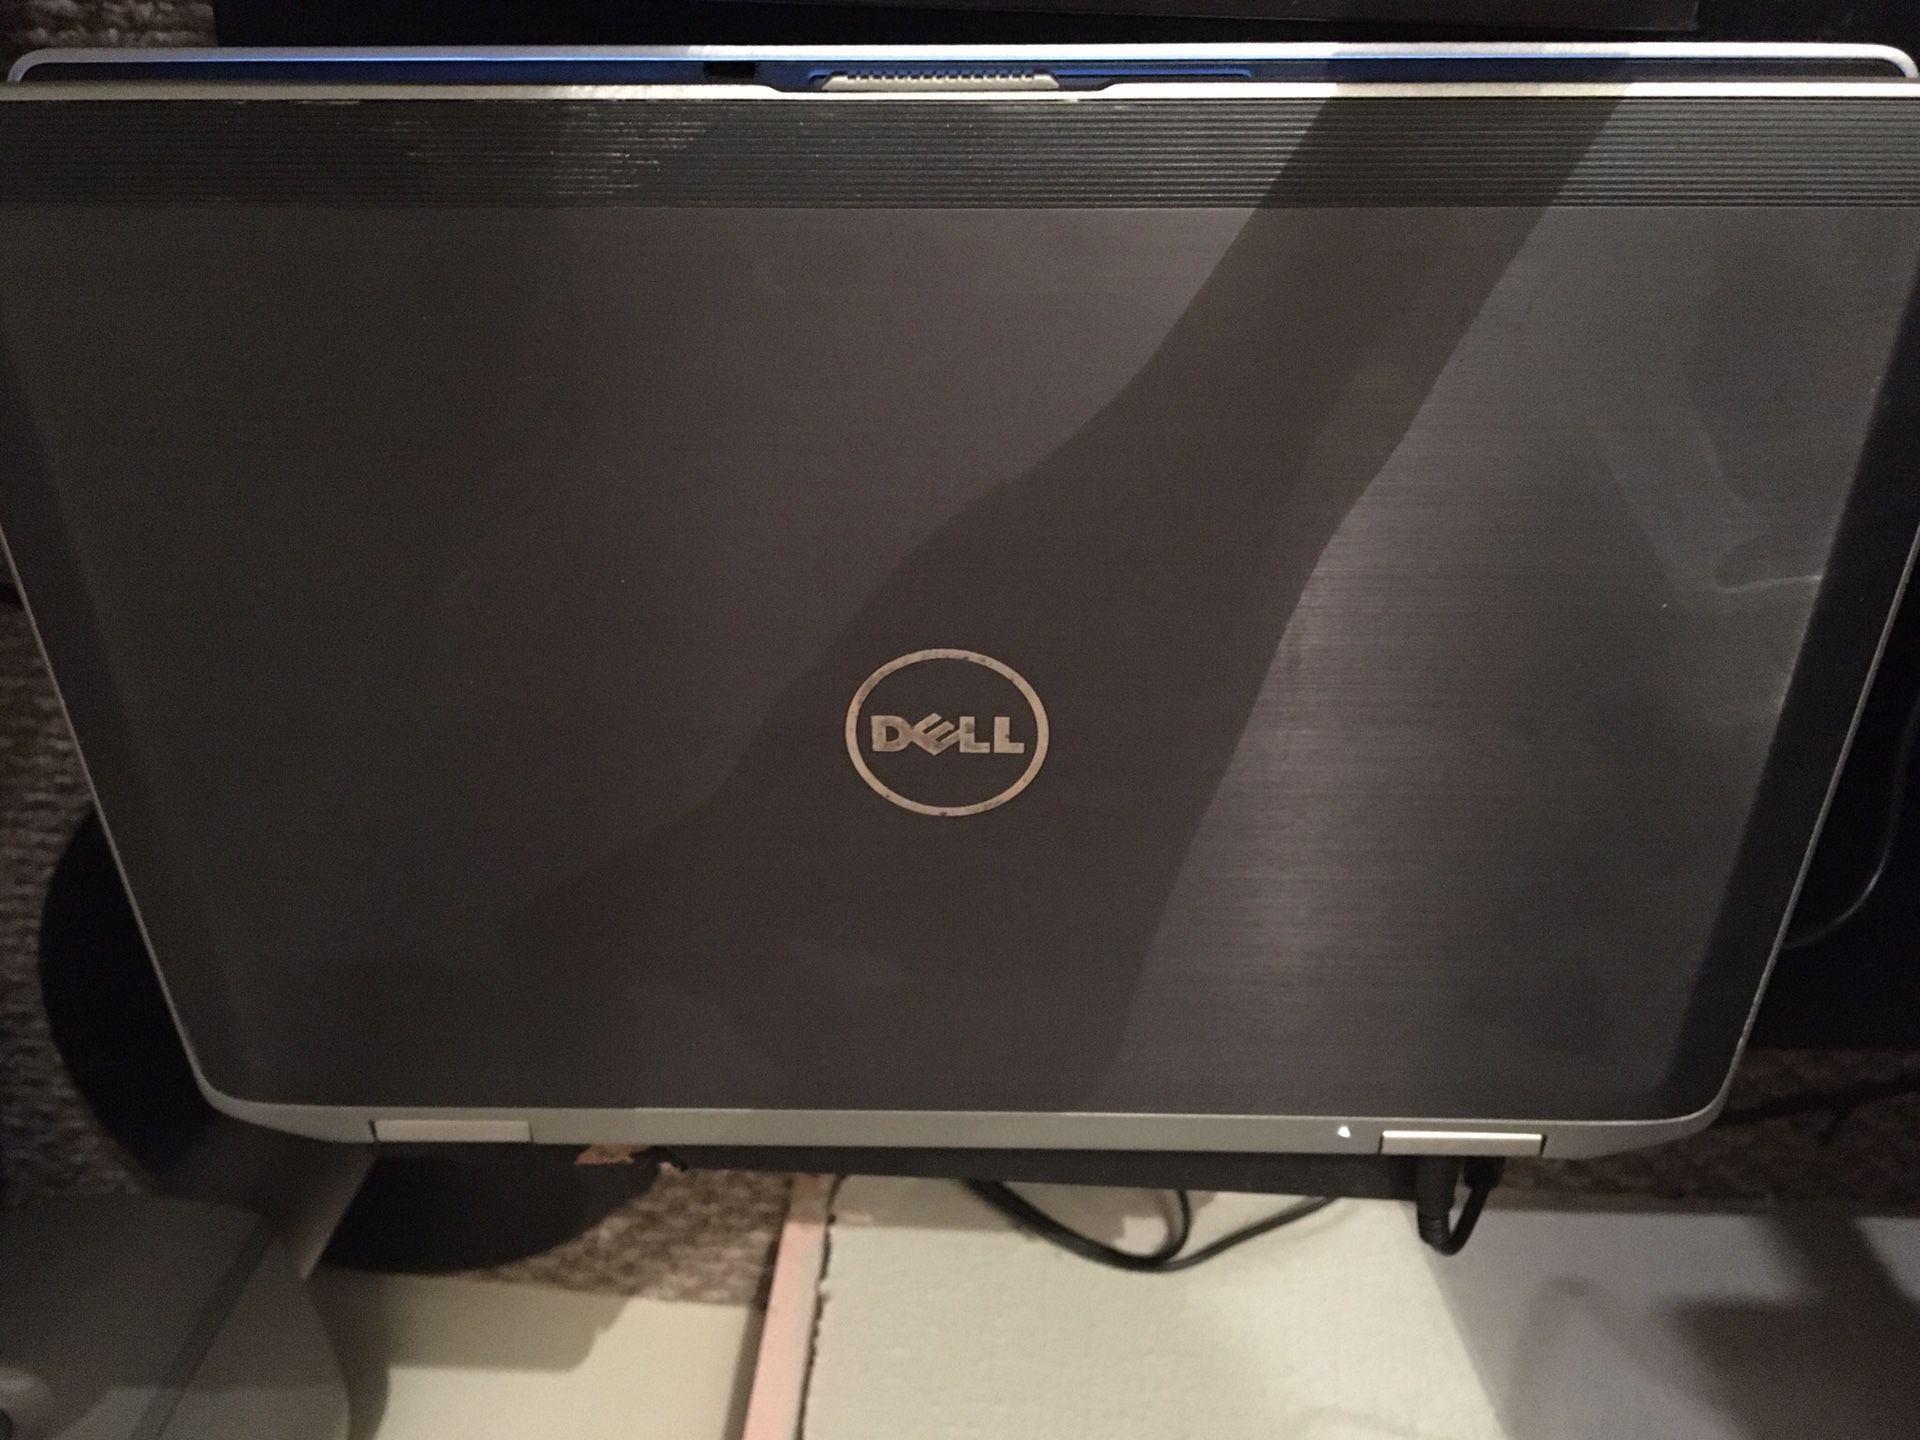 Dell Laptop with carrying case